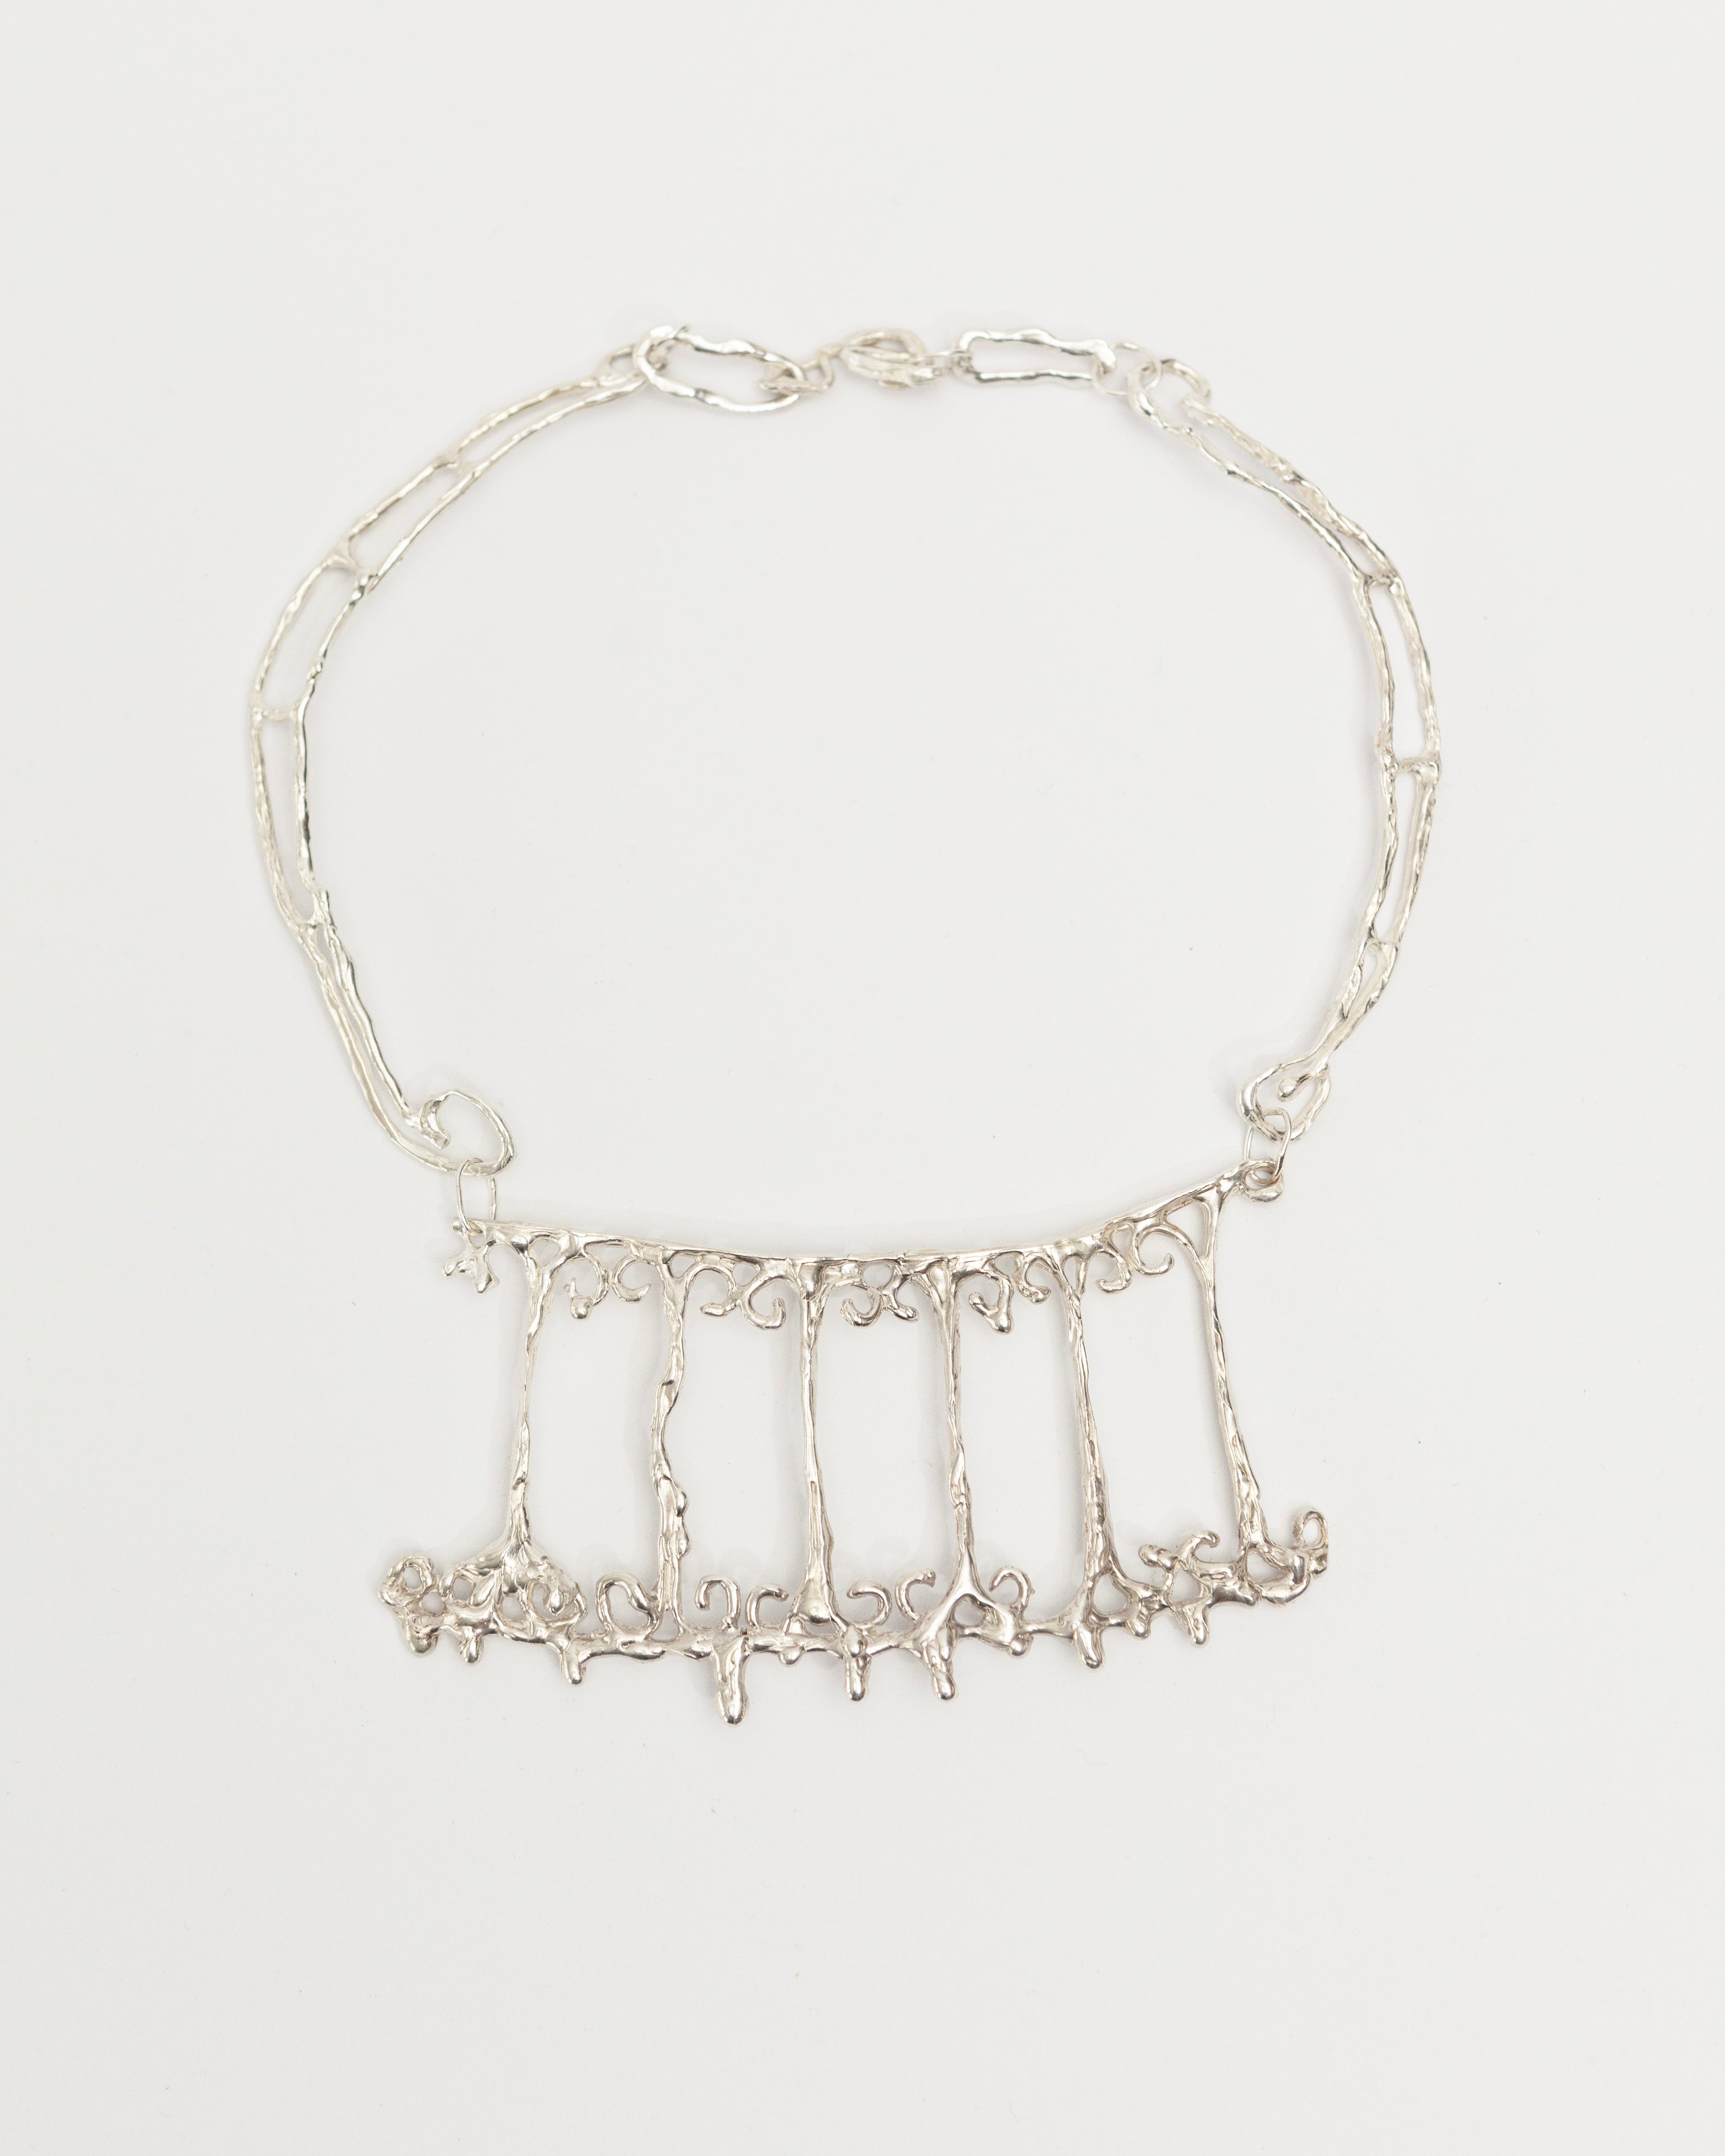 S. BHHABOO: MELTING GATE NECKLACE